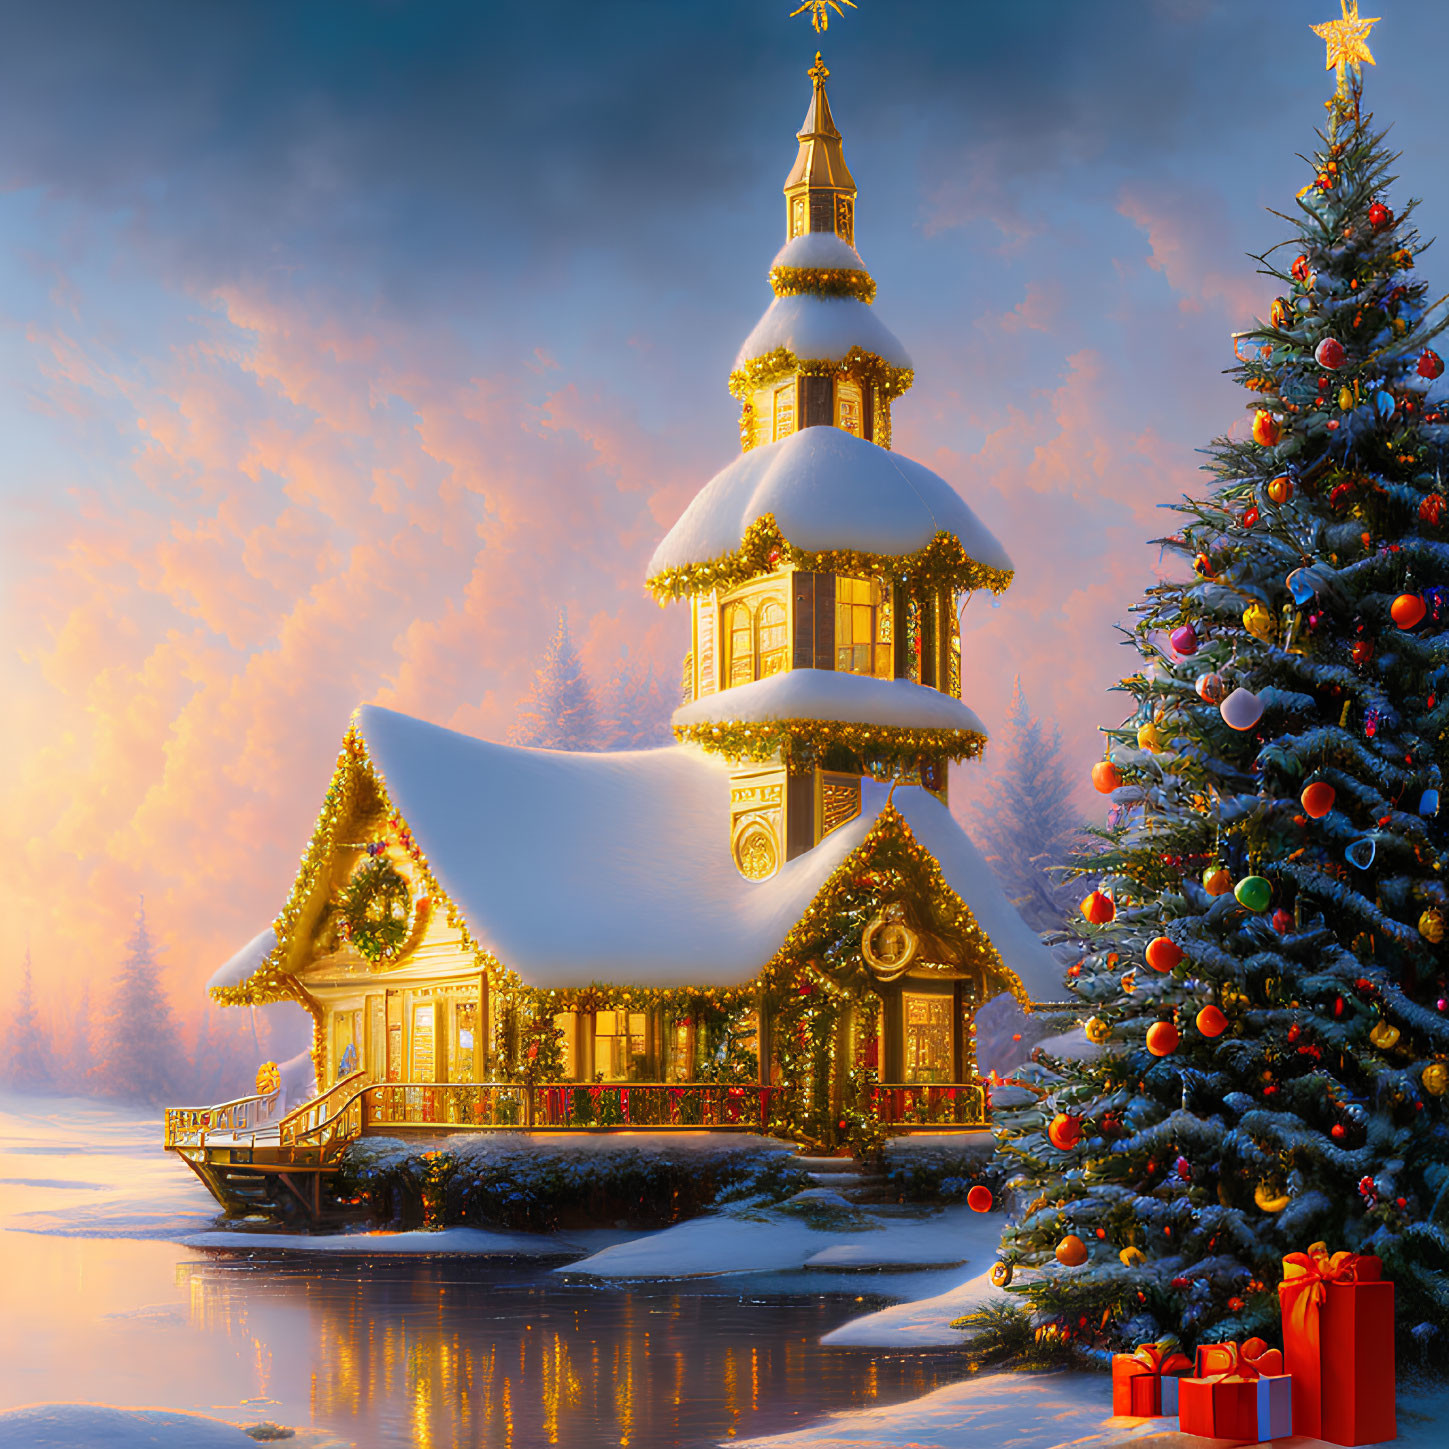 Snow-covered chapel with golden spires and Christmas tree in winter scene